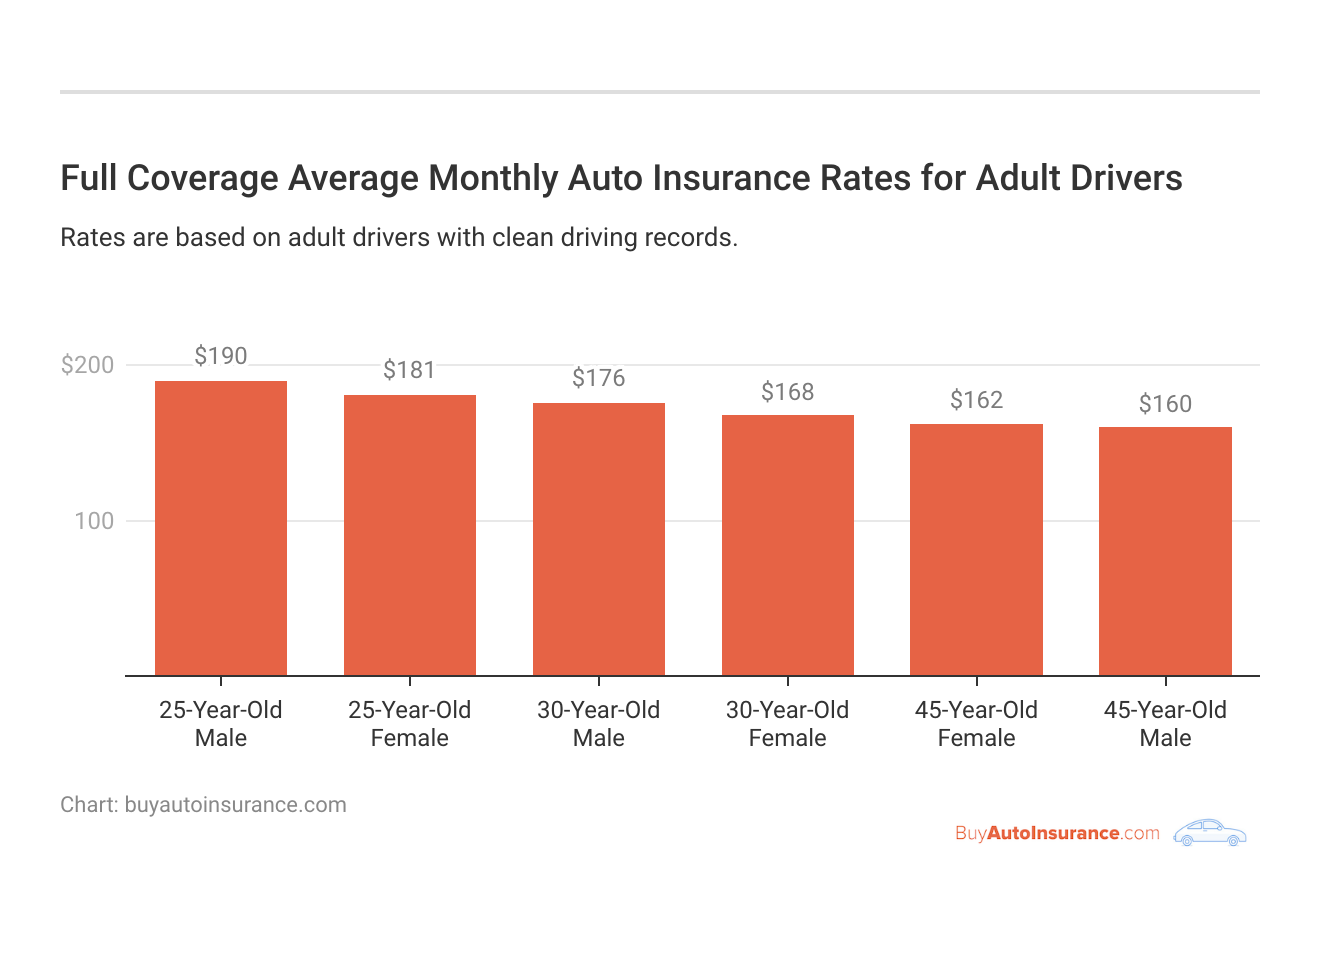 <h3>Full Coverage Average Monthly Auto Insurance Rates for Adult Drivers</h3>